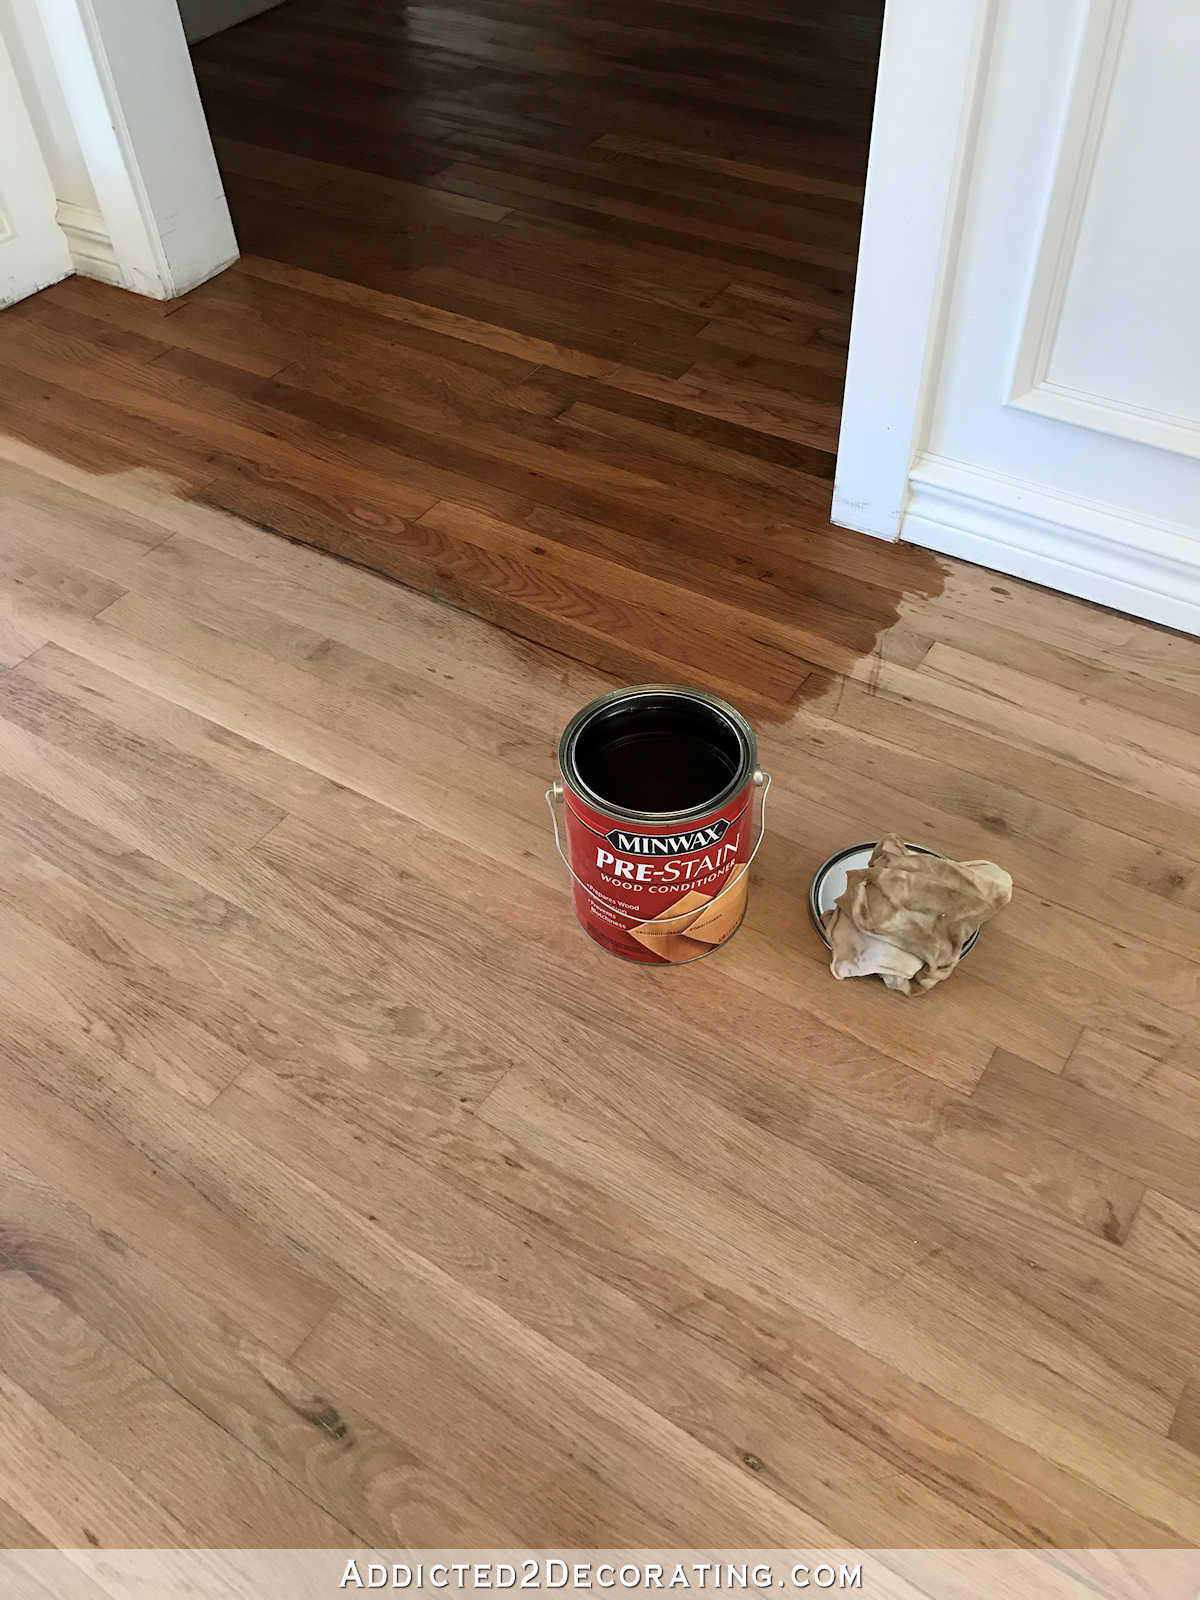 staining red oak hardwood floors - 1 - conditioning the wood with Minwax pre-stain conditioner